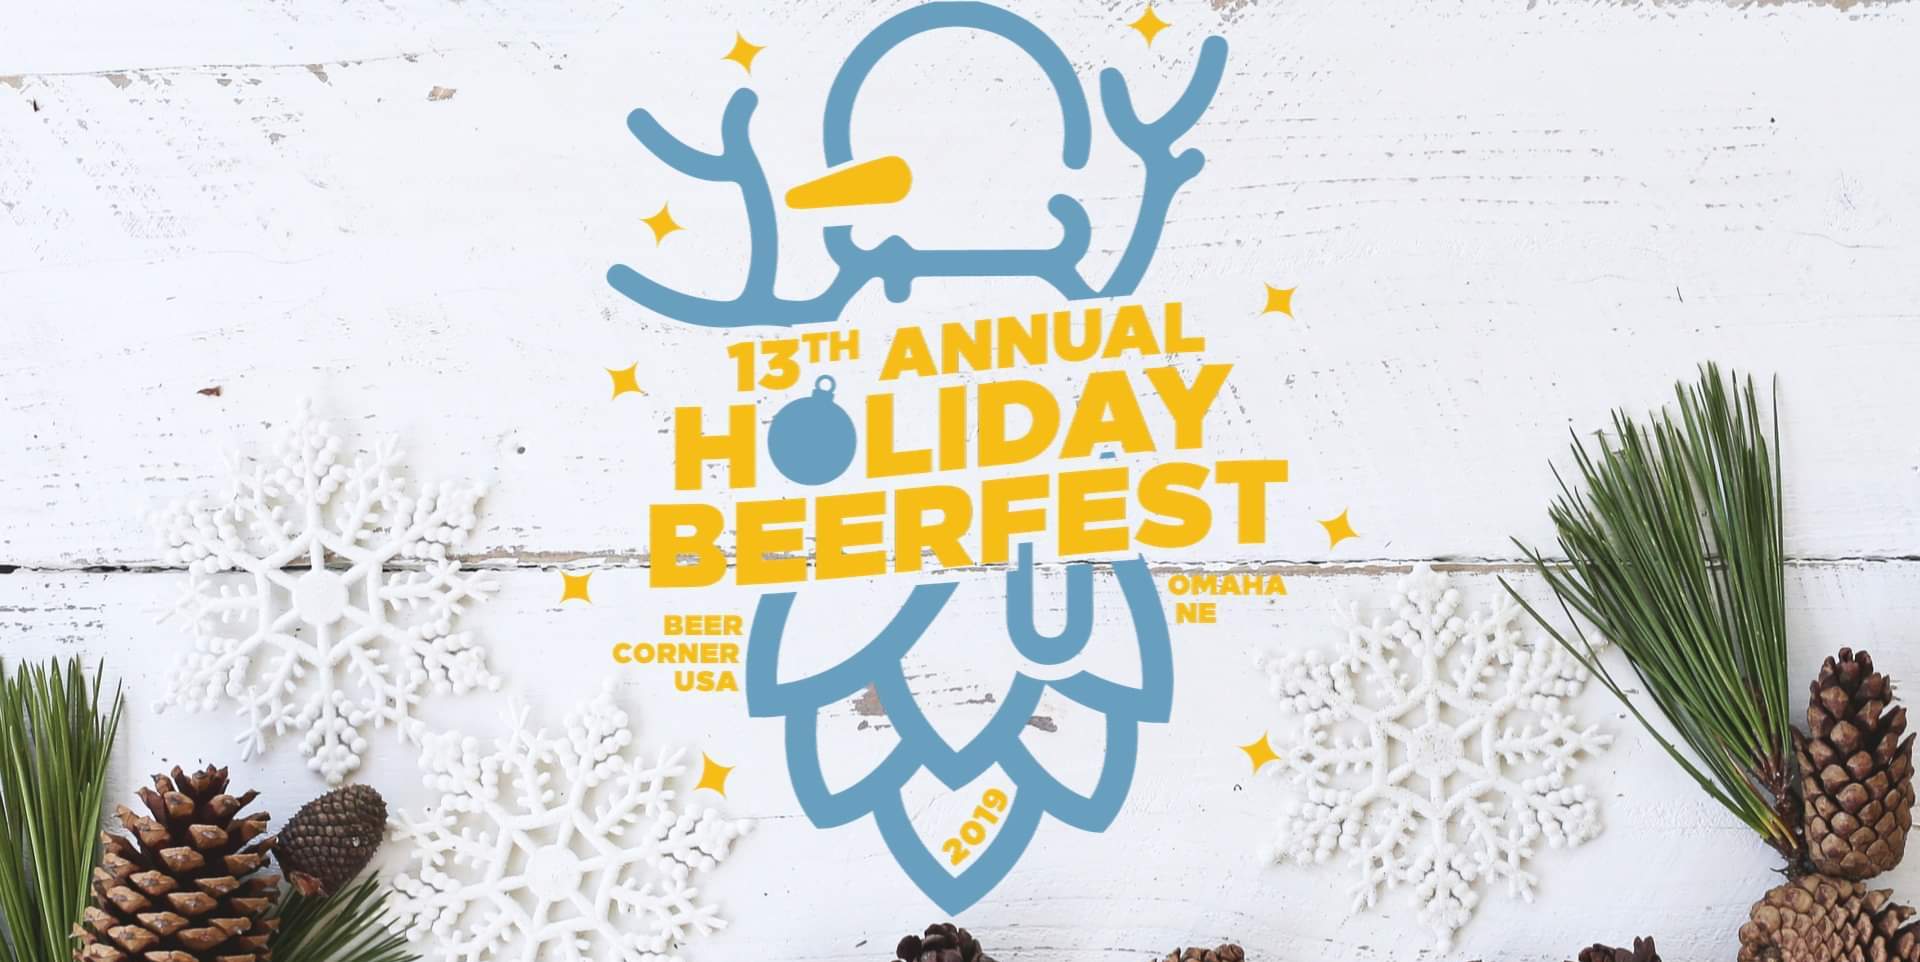 13th Annual Holiday Beerfest promotional image